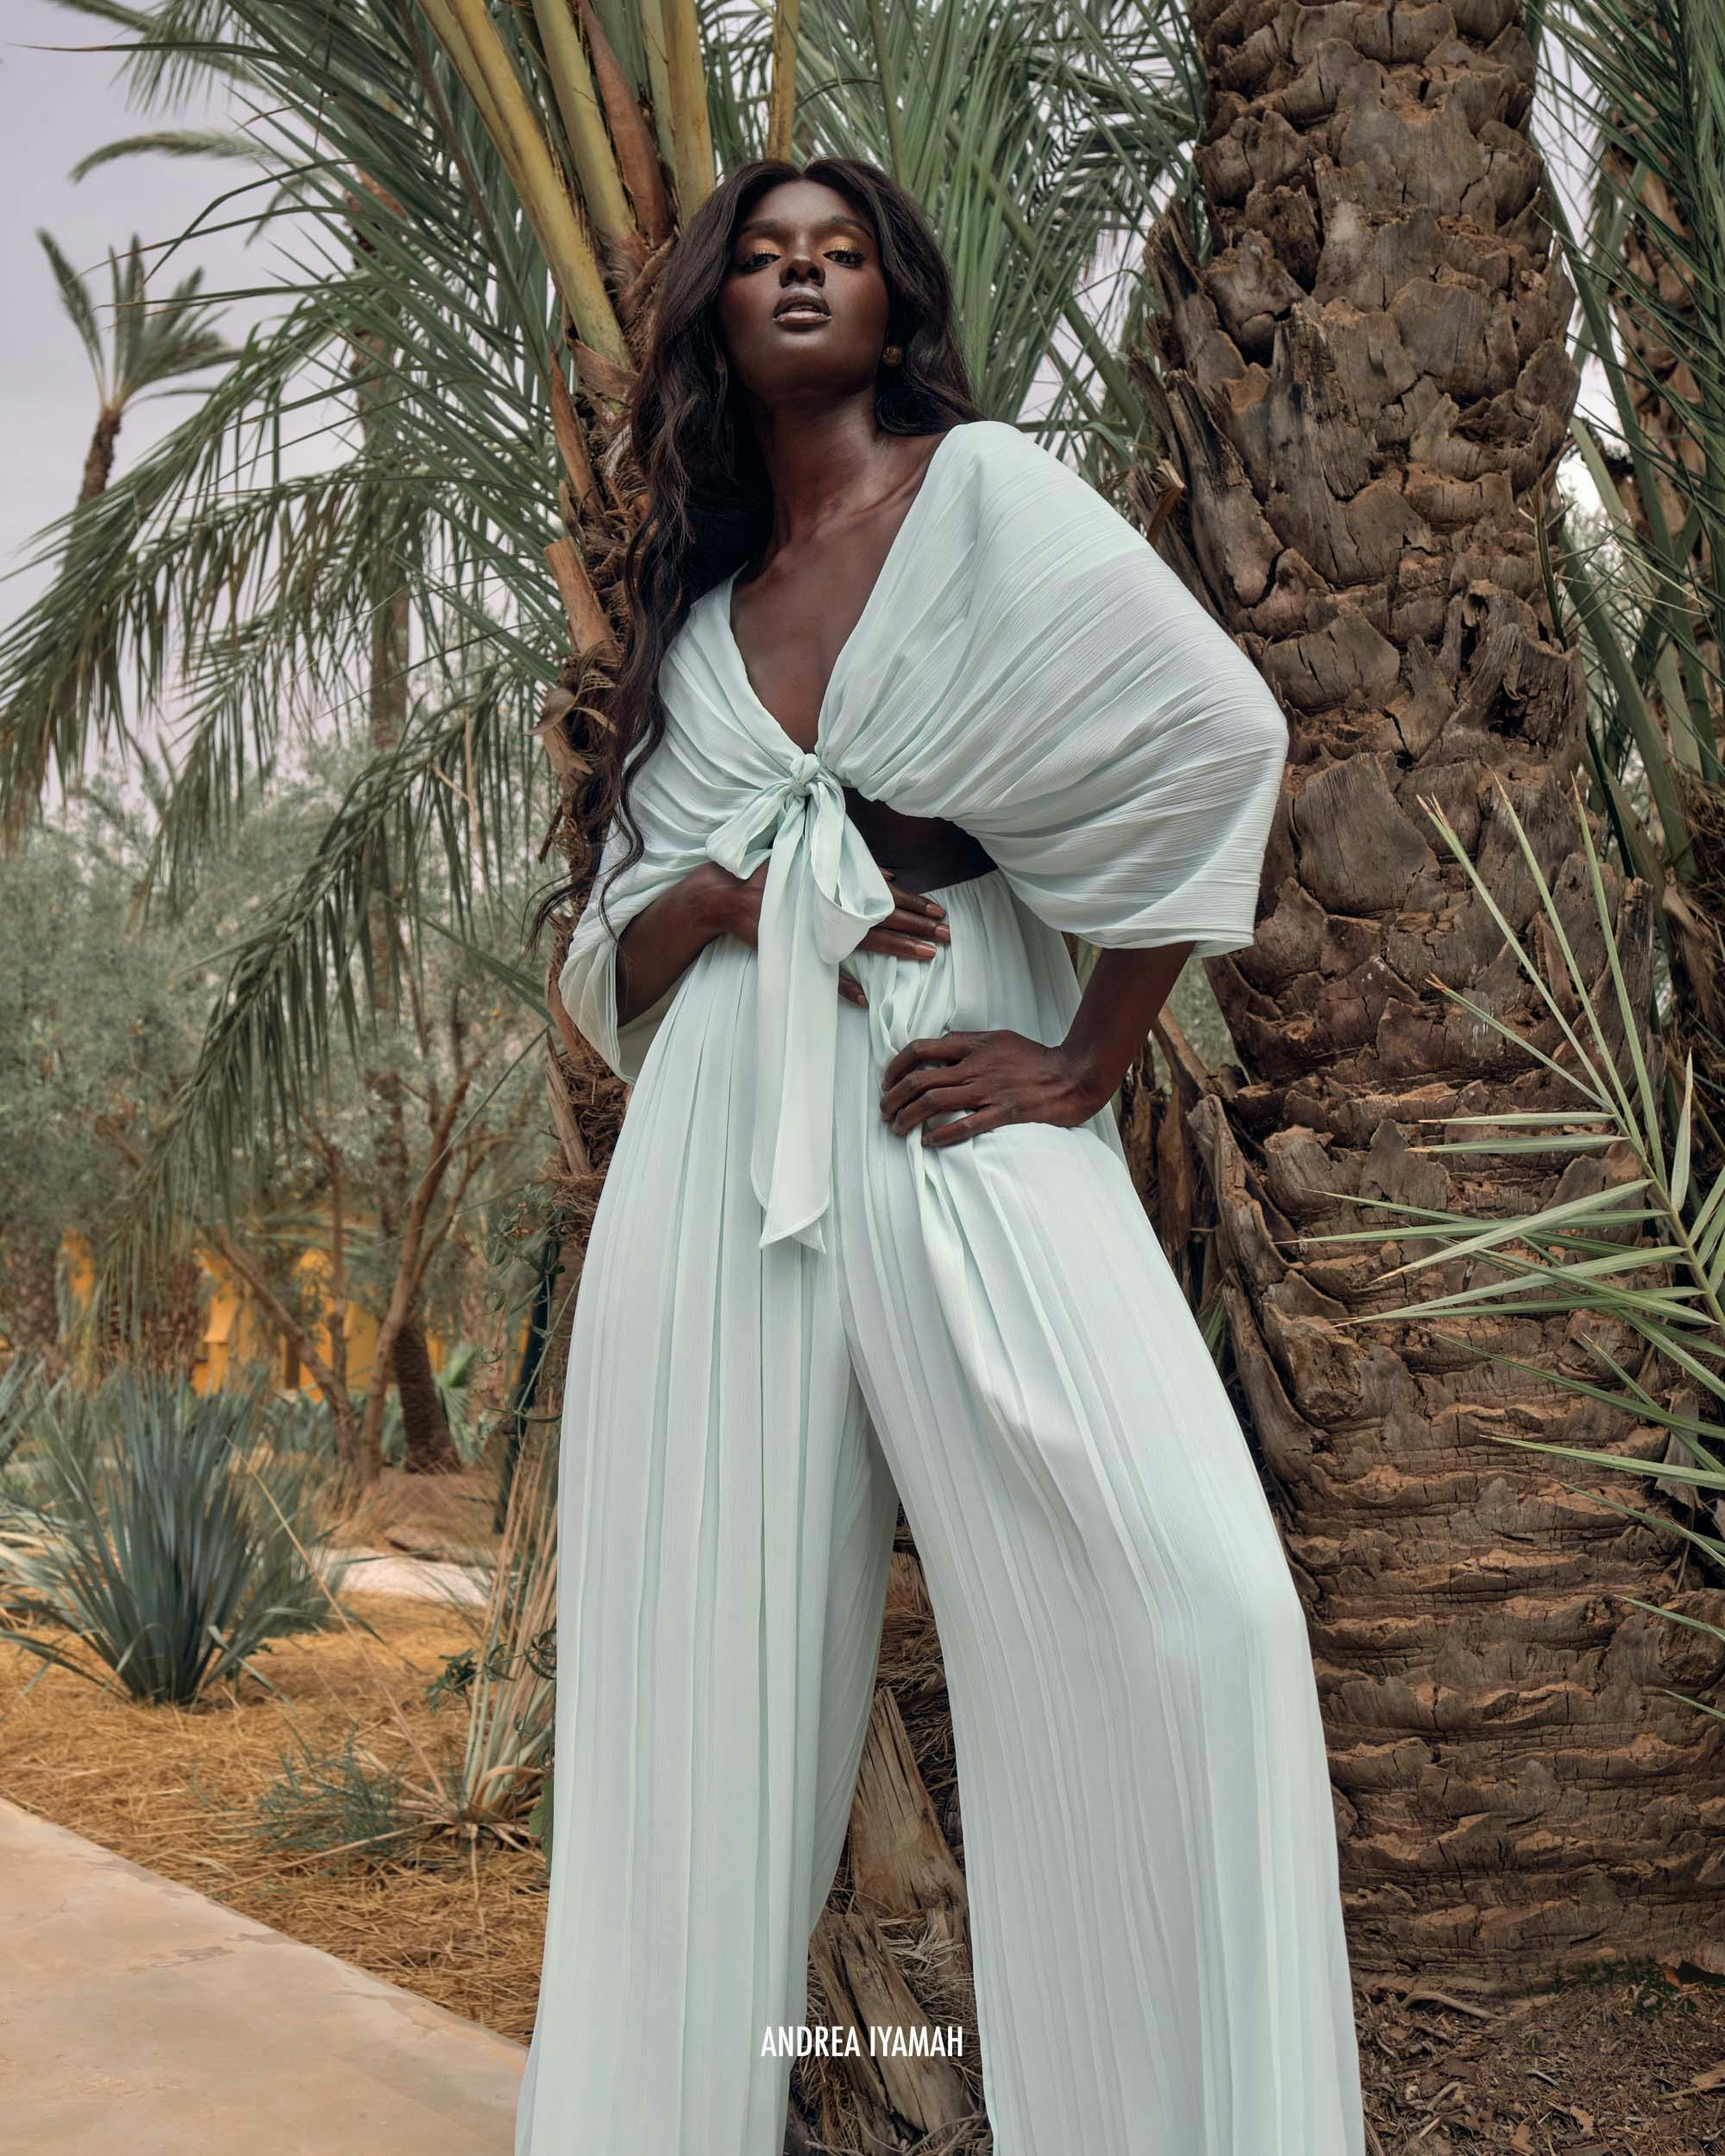 Primary image of Thero Jumpsuit - Mint Blue, a product by Andrea Iyamah